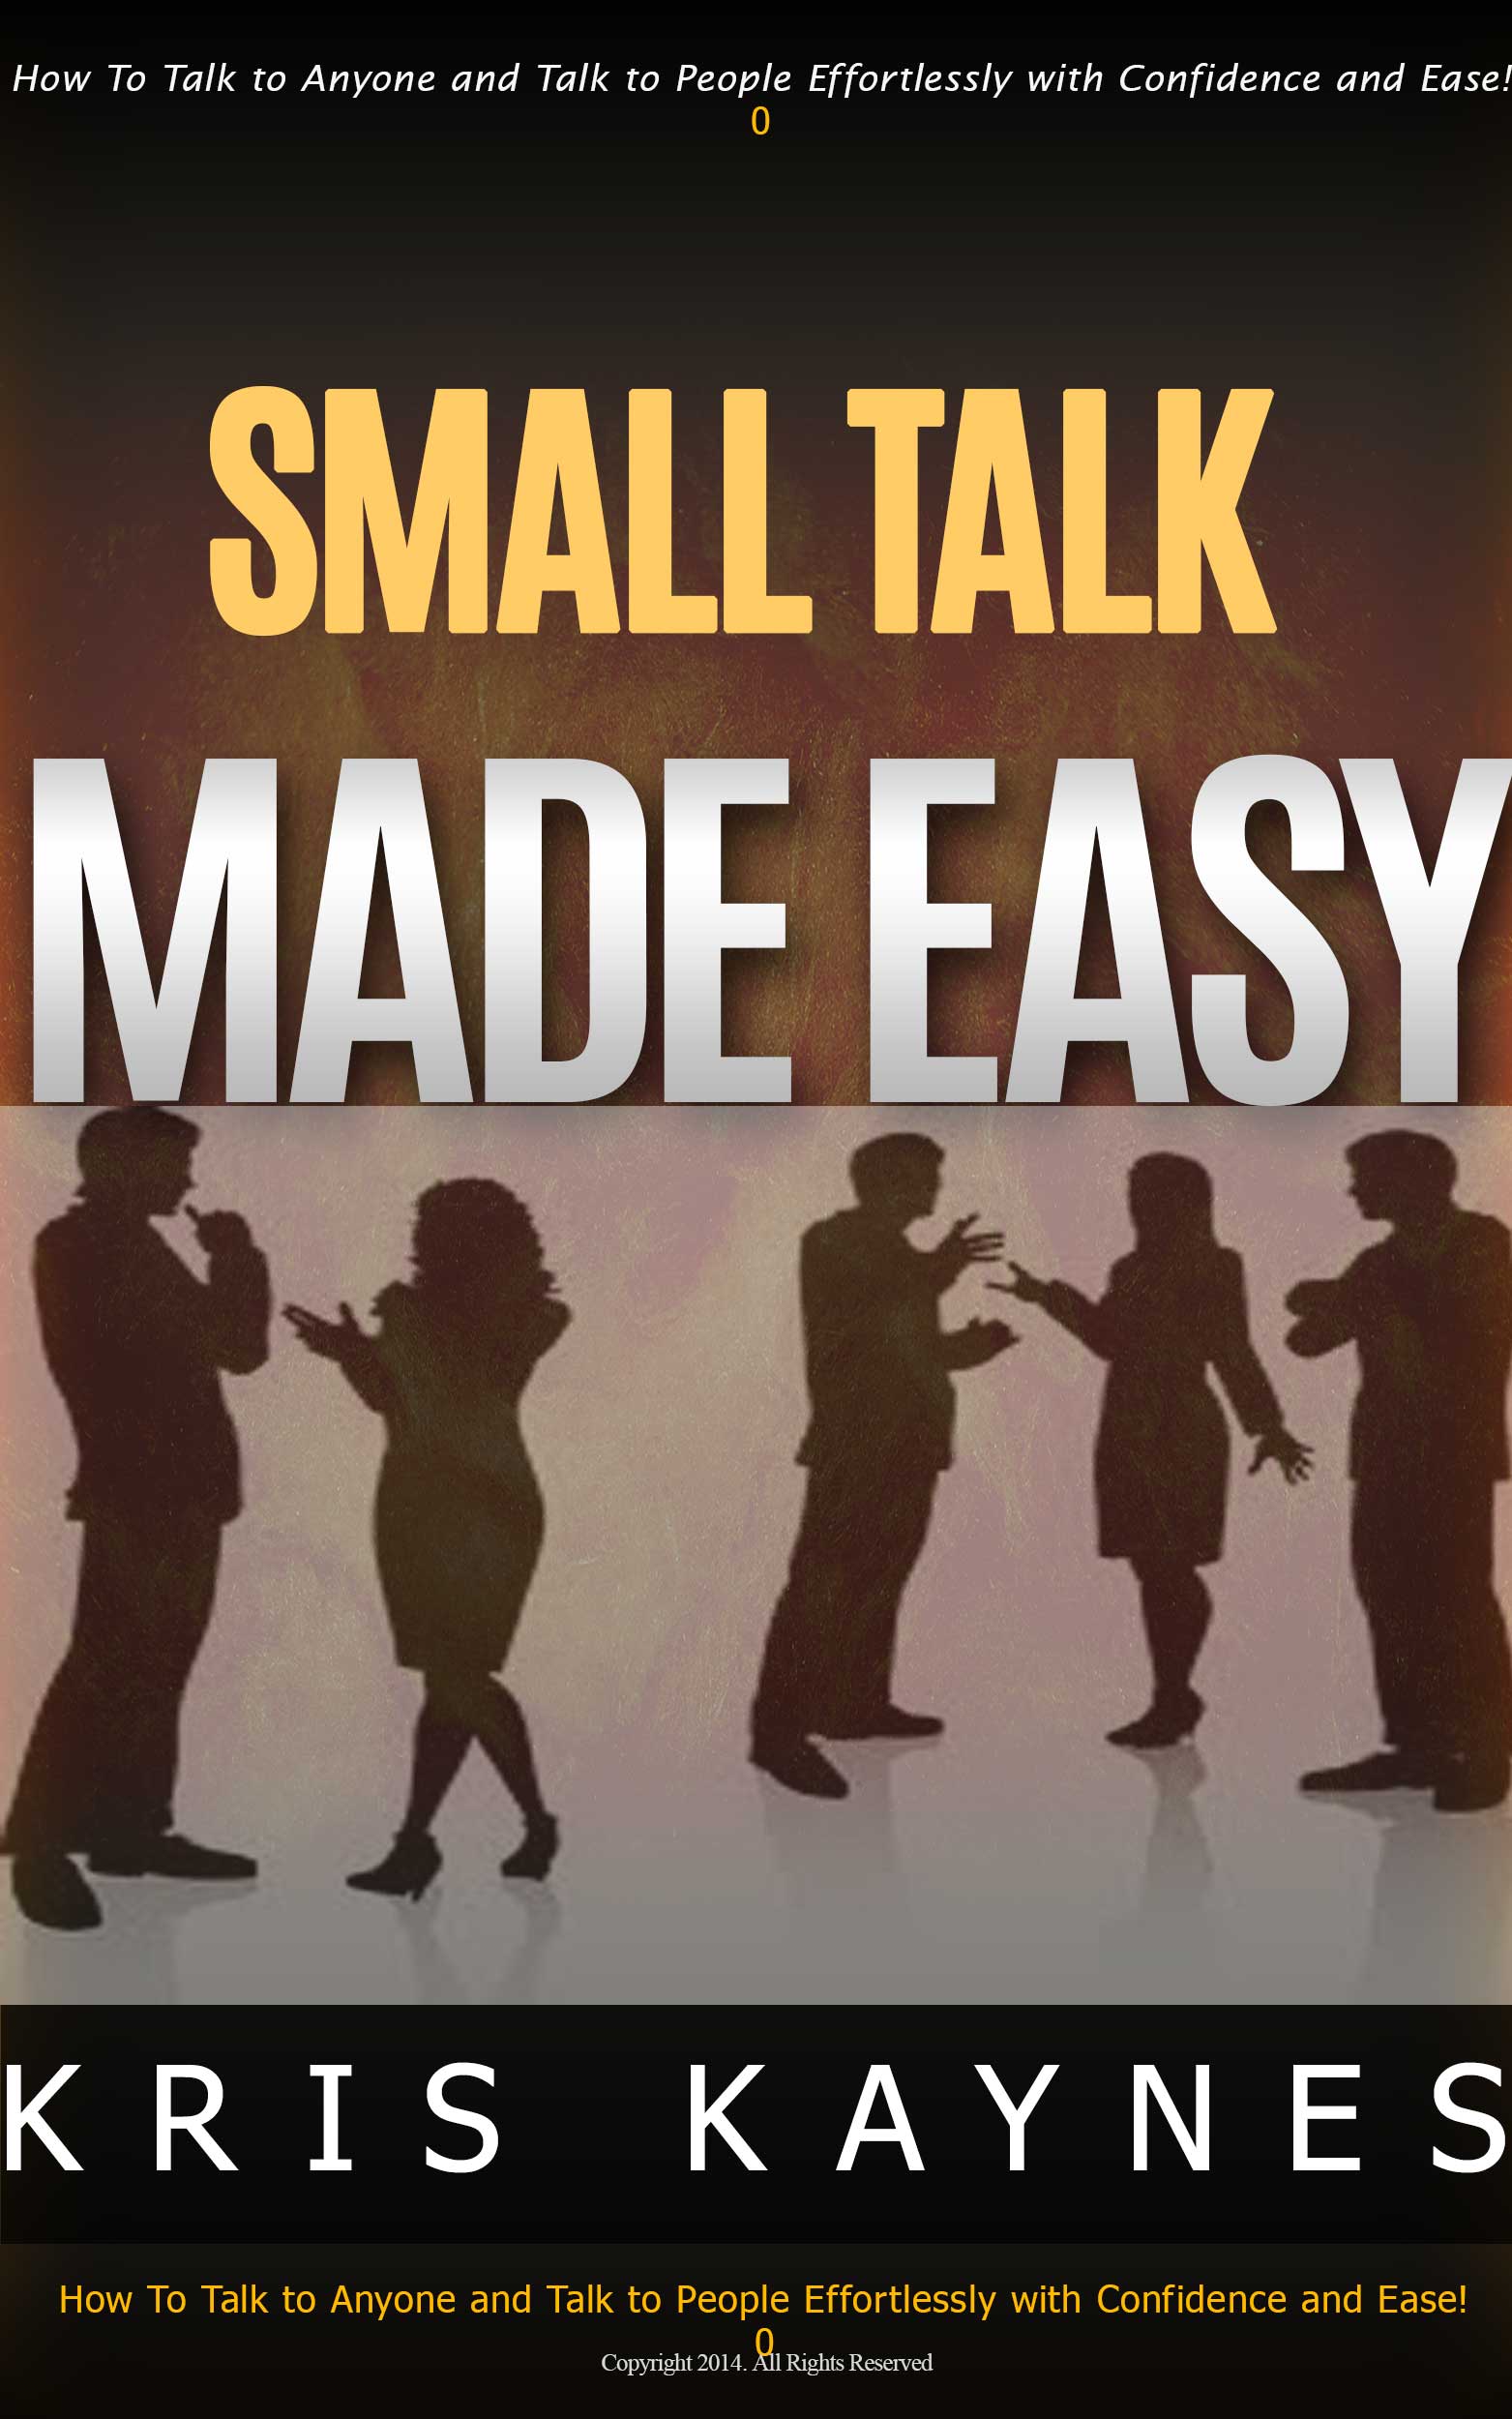 Small Talk Made EASY!: How to Talk To Anyone Effortlessly and Talk with Confidence and Ease! by Kris Kaynes